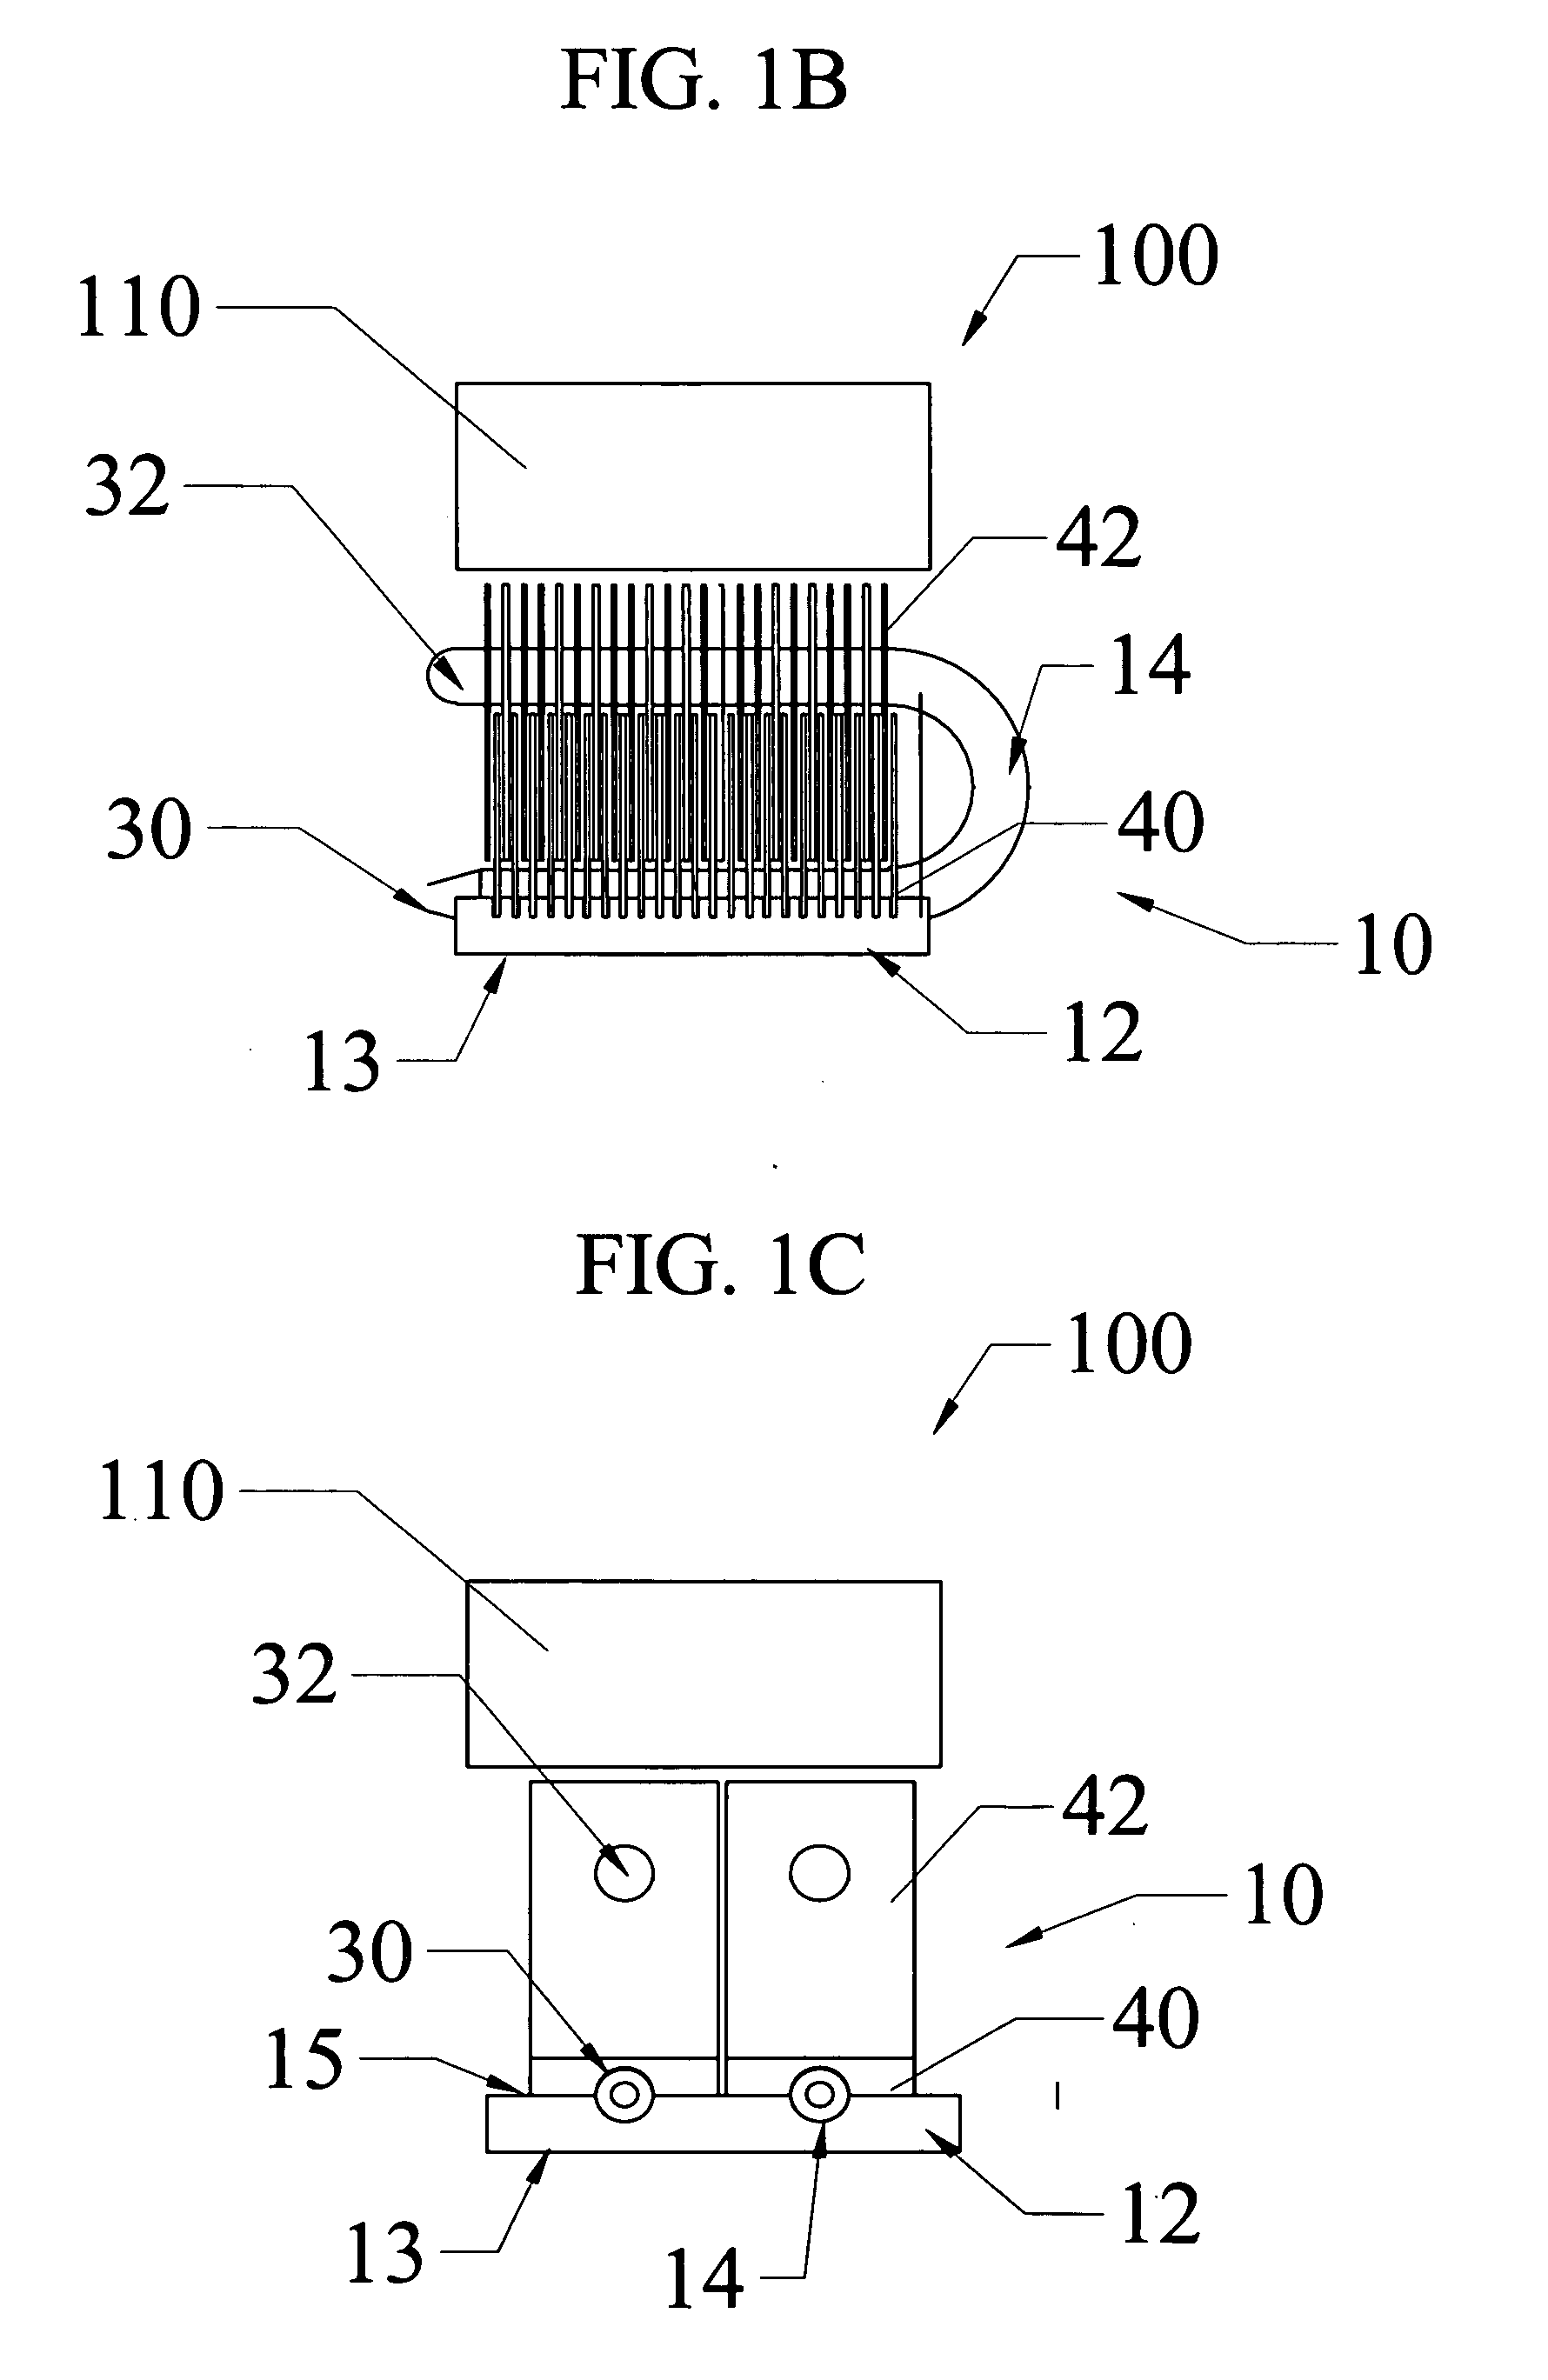 Heat sink and heat sink assembly